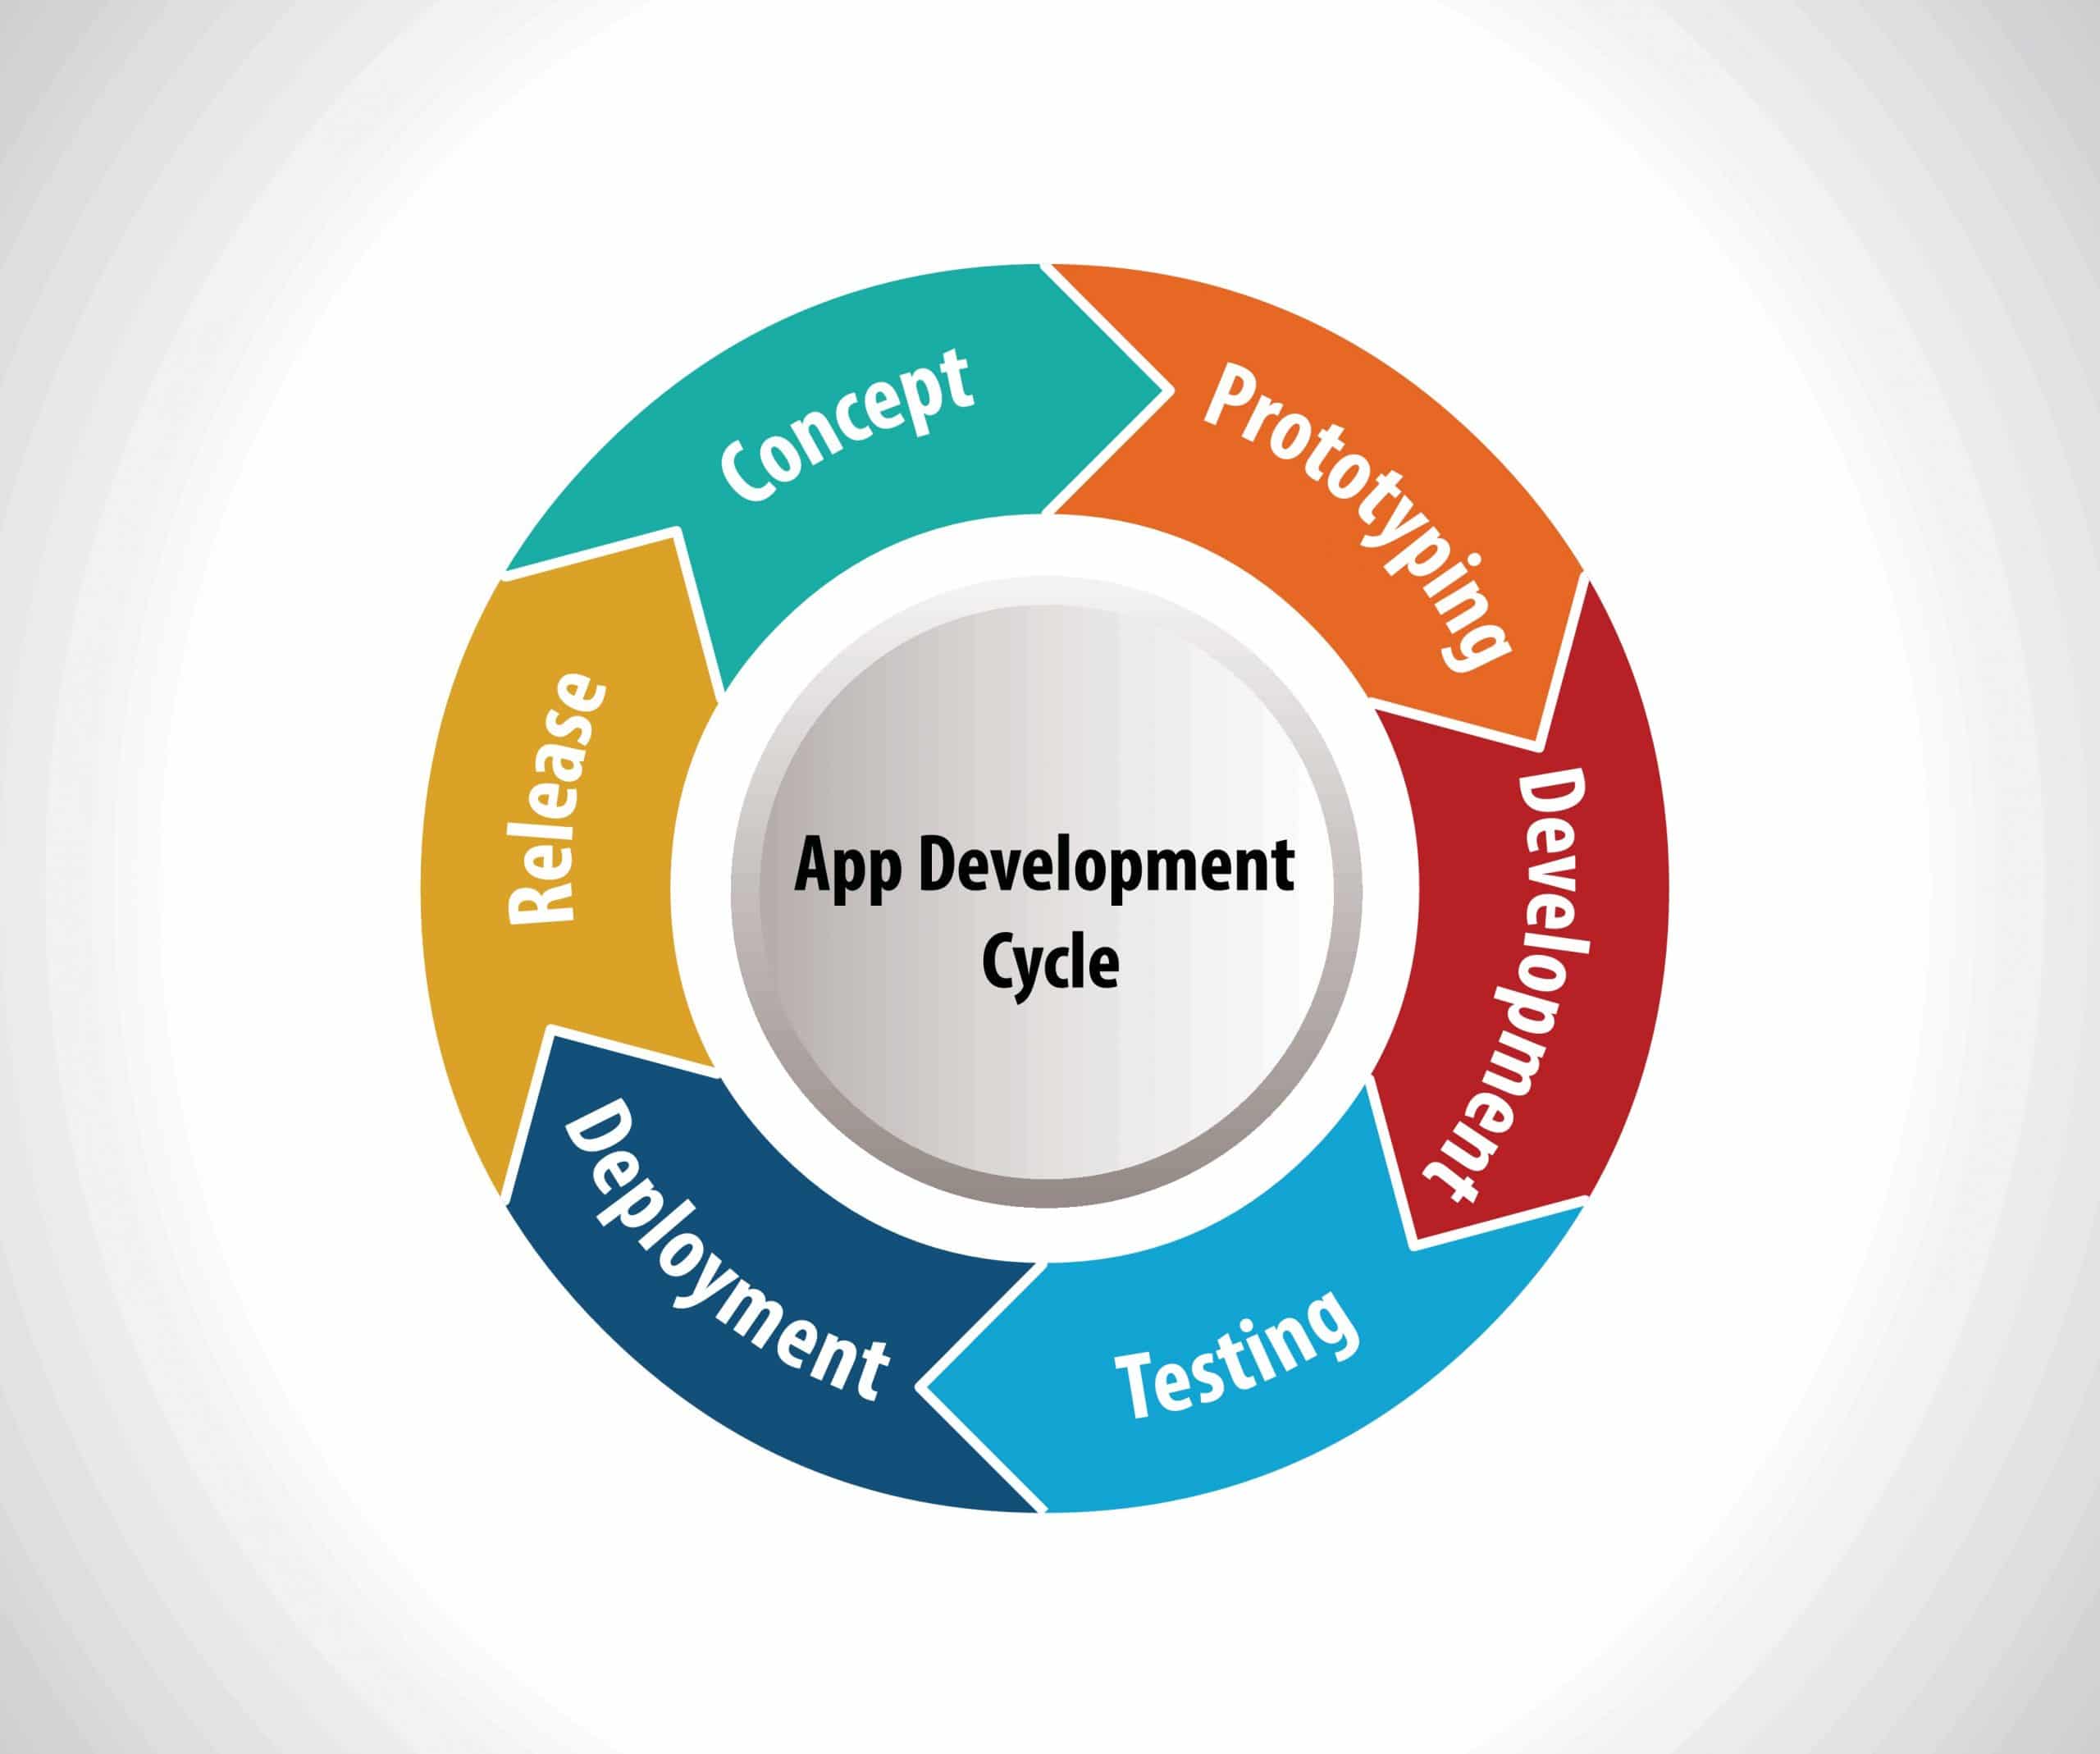 As A Software Developer, How Familiar Are You With The Application Development Cycle?